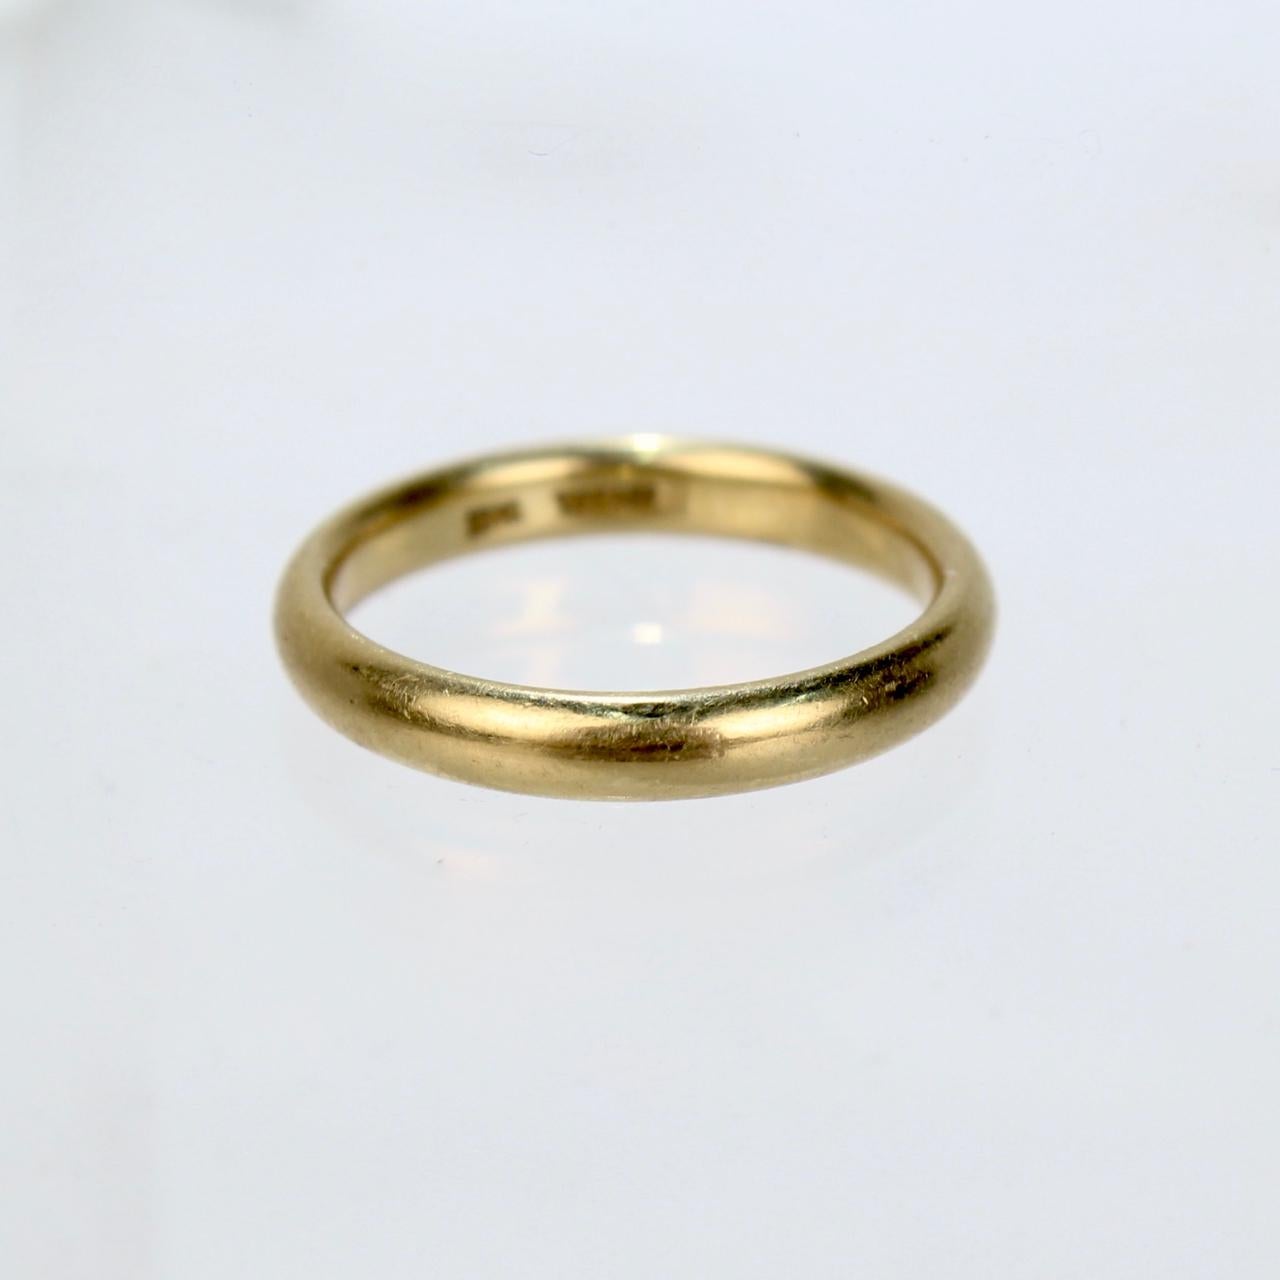 A very fine Tiffany & Co. band ring.

In 18k gold.

Marked to the shank: 18k and Tiffany & Co.

A perfectly simple and refined ring from the world's leading retailer!

Measurements:
Total Diameter: ca. 20 mm
Band Width: ca. 3 mm
Band Depth: ca. 2